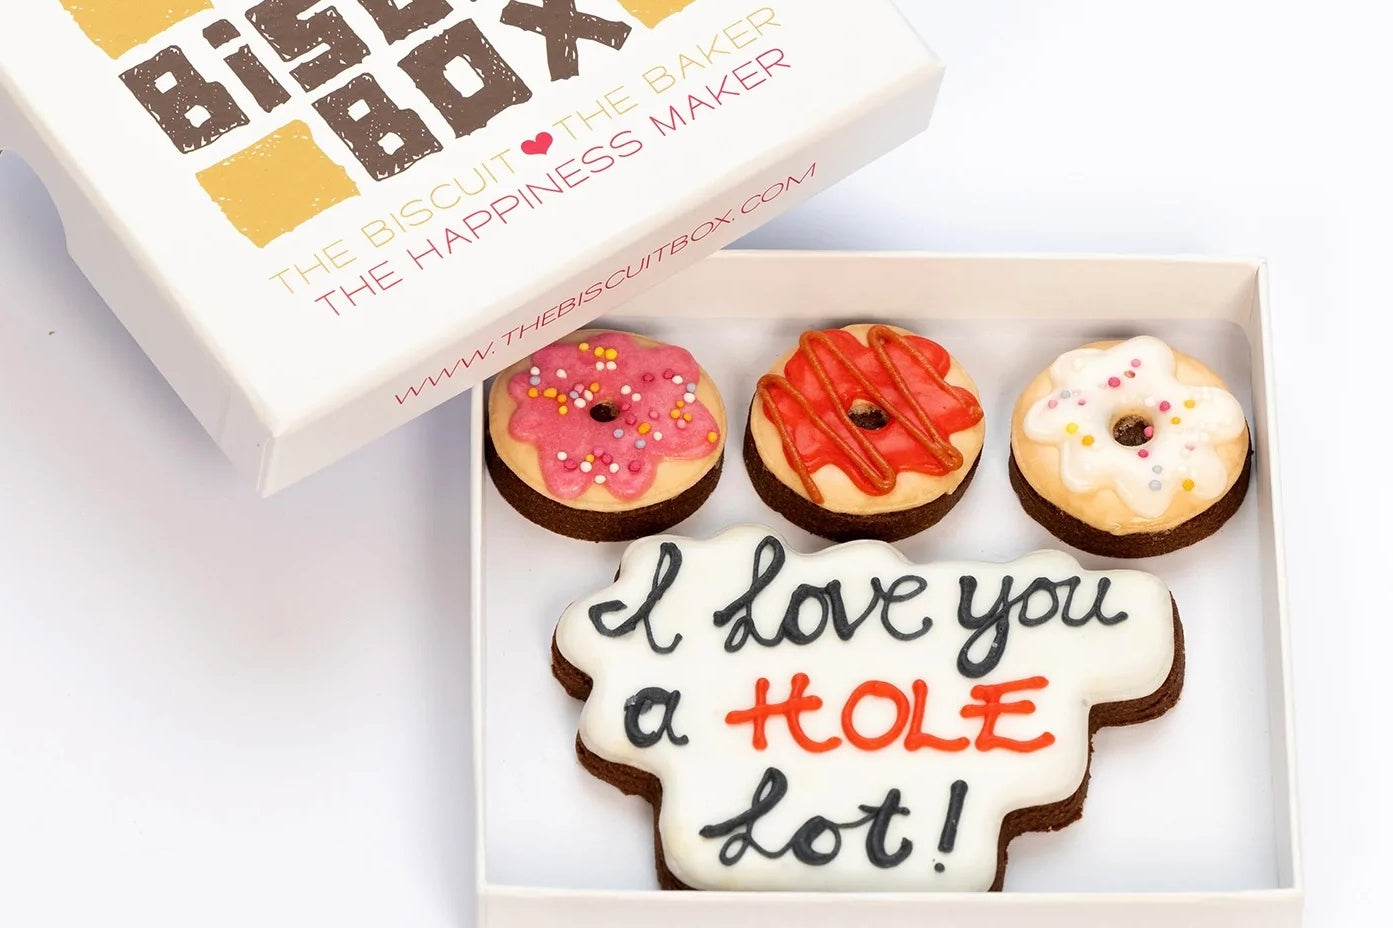 valentines day biscuits in the shape of min I doughnuts with text biscuit that says I love you a hole lot.